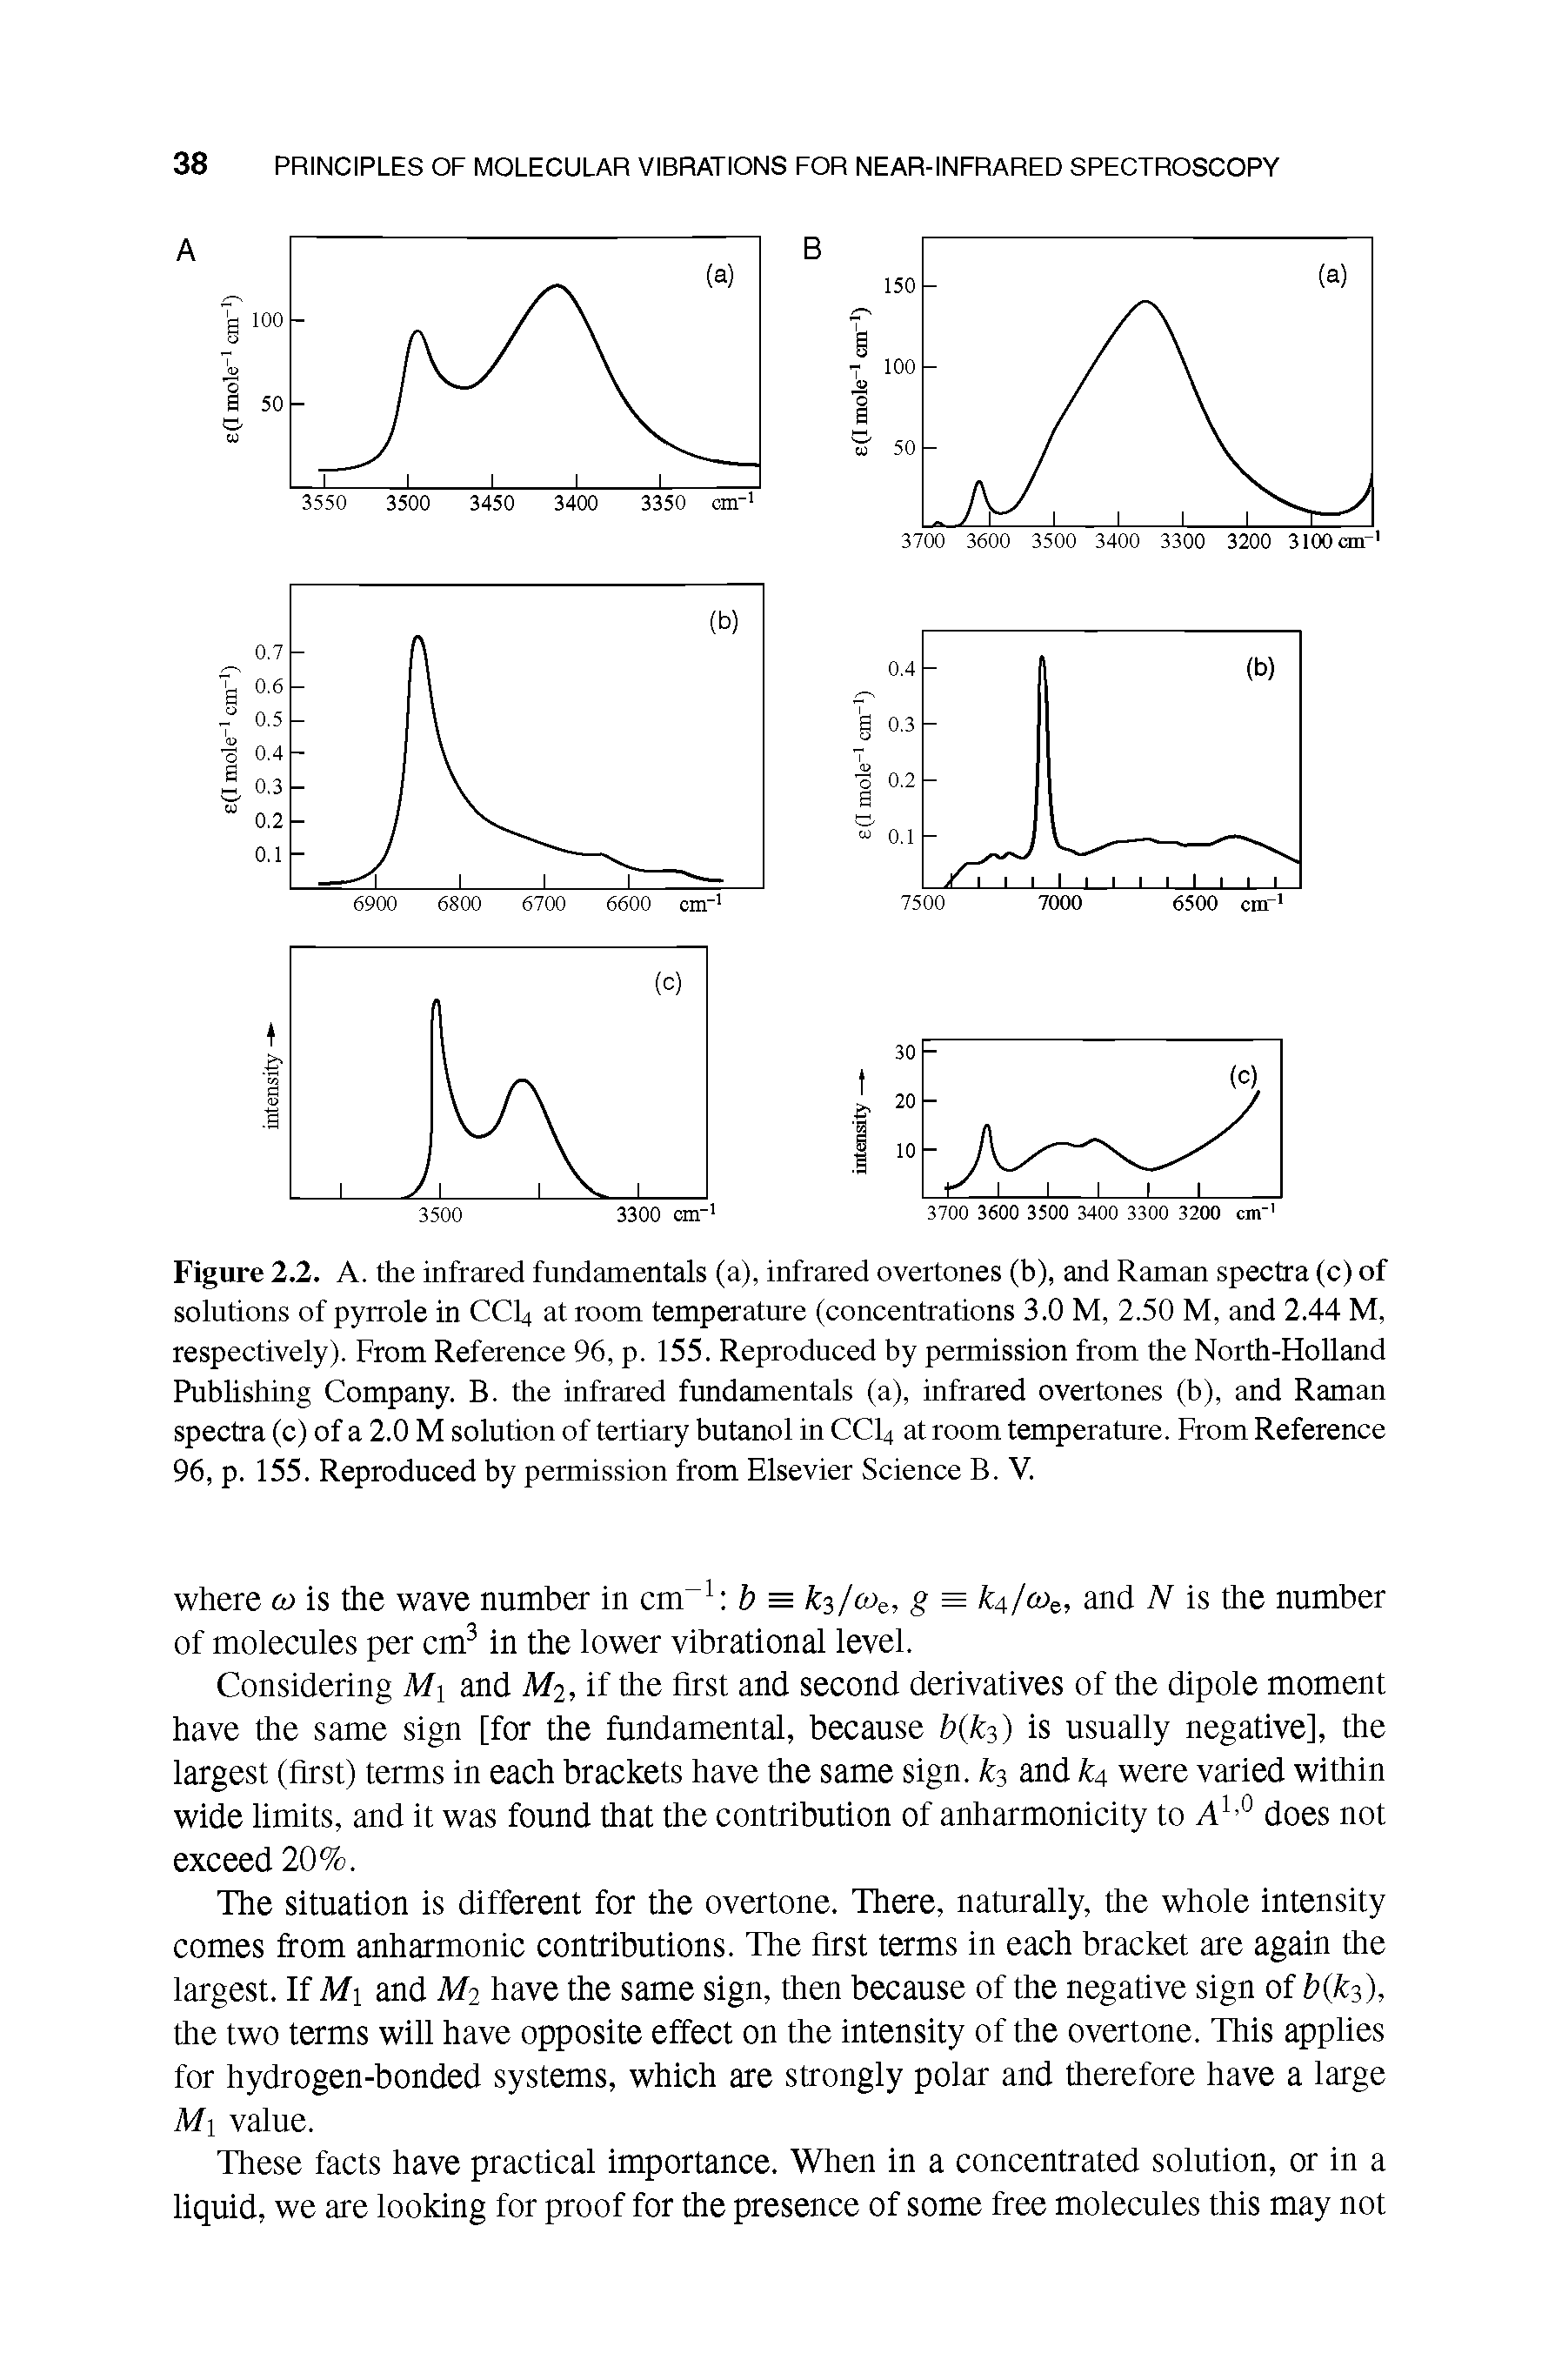 Figure 2.2. A. the infrared fundamentals (a), infrared overtones (b), and Raman spectra (c) of solutions of pyrrole in CCLt at room temperature (concentrations 3.0 M, 2.50 M, and 2.44 M, respectively). From Reference 96, p. 155. Reproduced by permission from the North-Holland Publishing Company. B. the infrared fundamentals (a), infrared overtones (b), and Raman spectra (c) of a 2.0 M solution of tertiary butanol in CCI4 at room temperature. From Reference 96, p. 155. Reproduced by permission from Elsevier Science B. V.